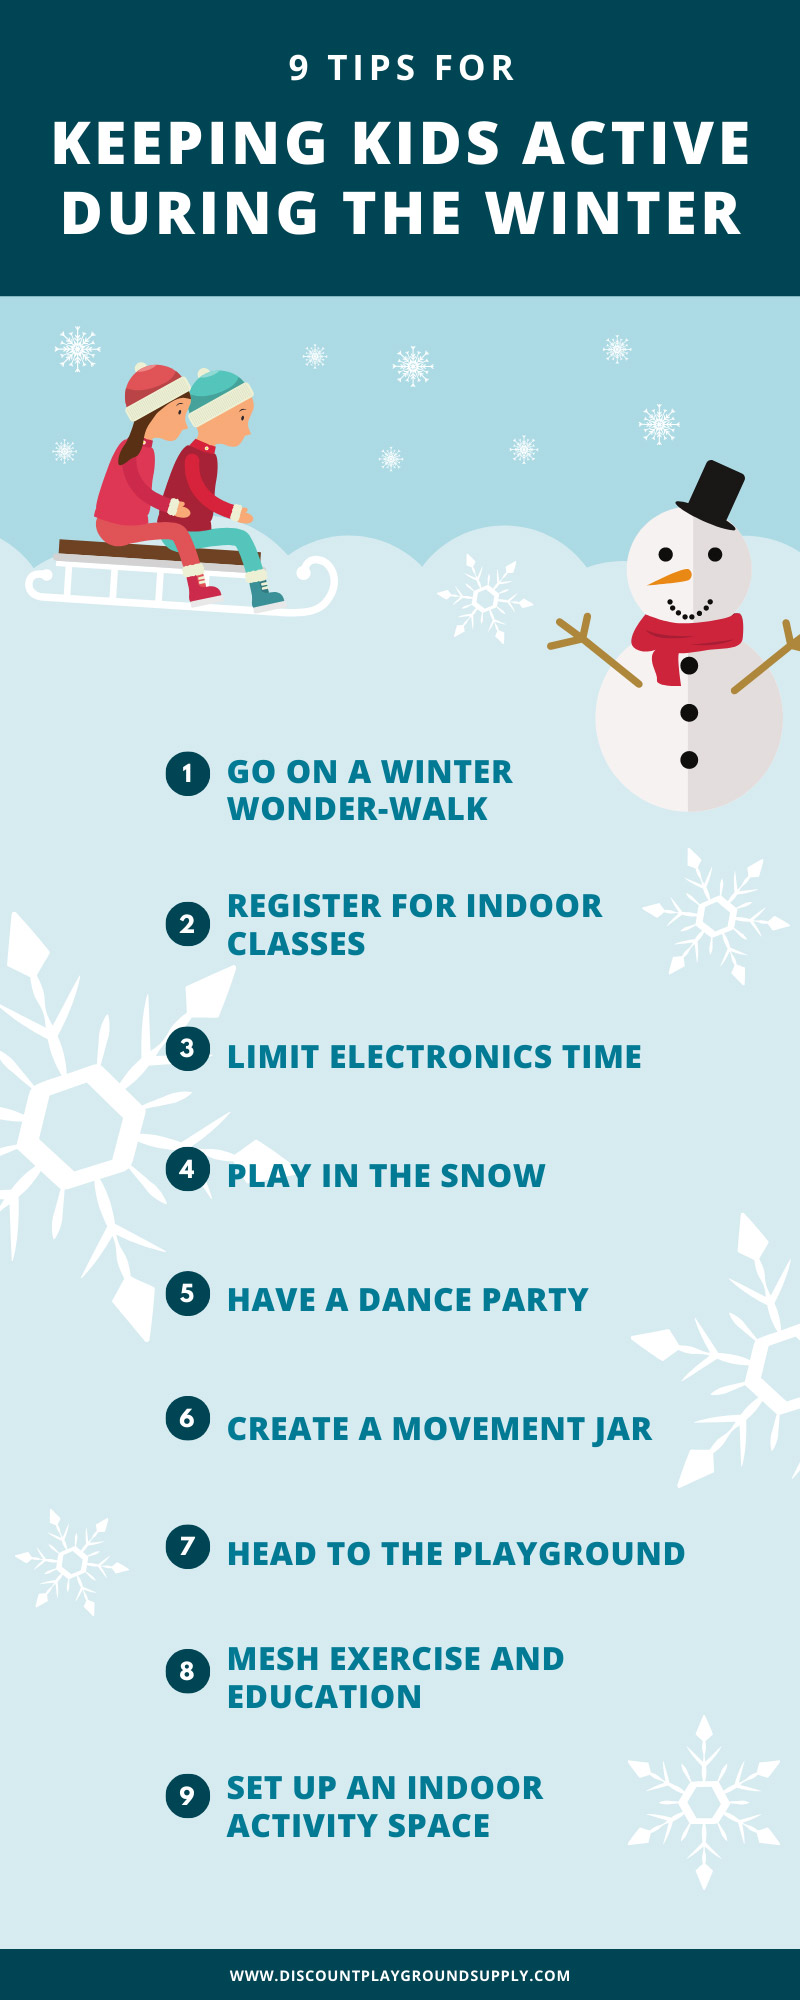 How to Keep Kids Active During the Winter